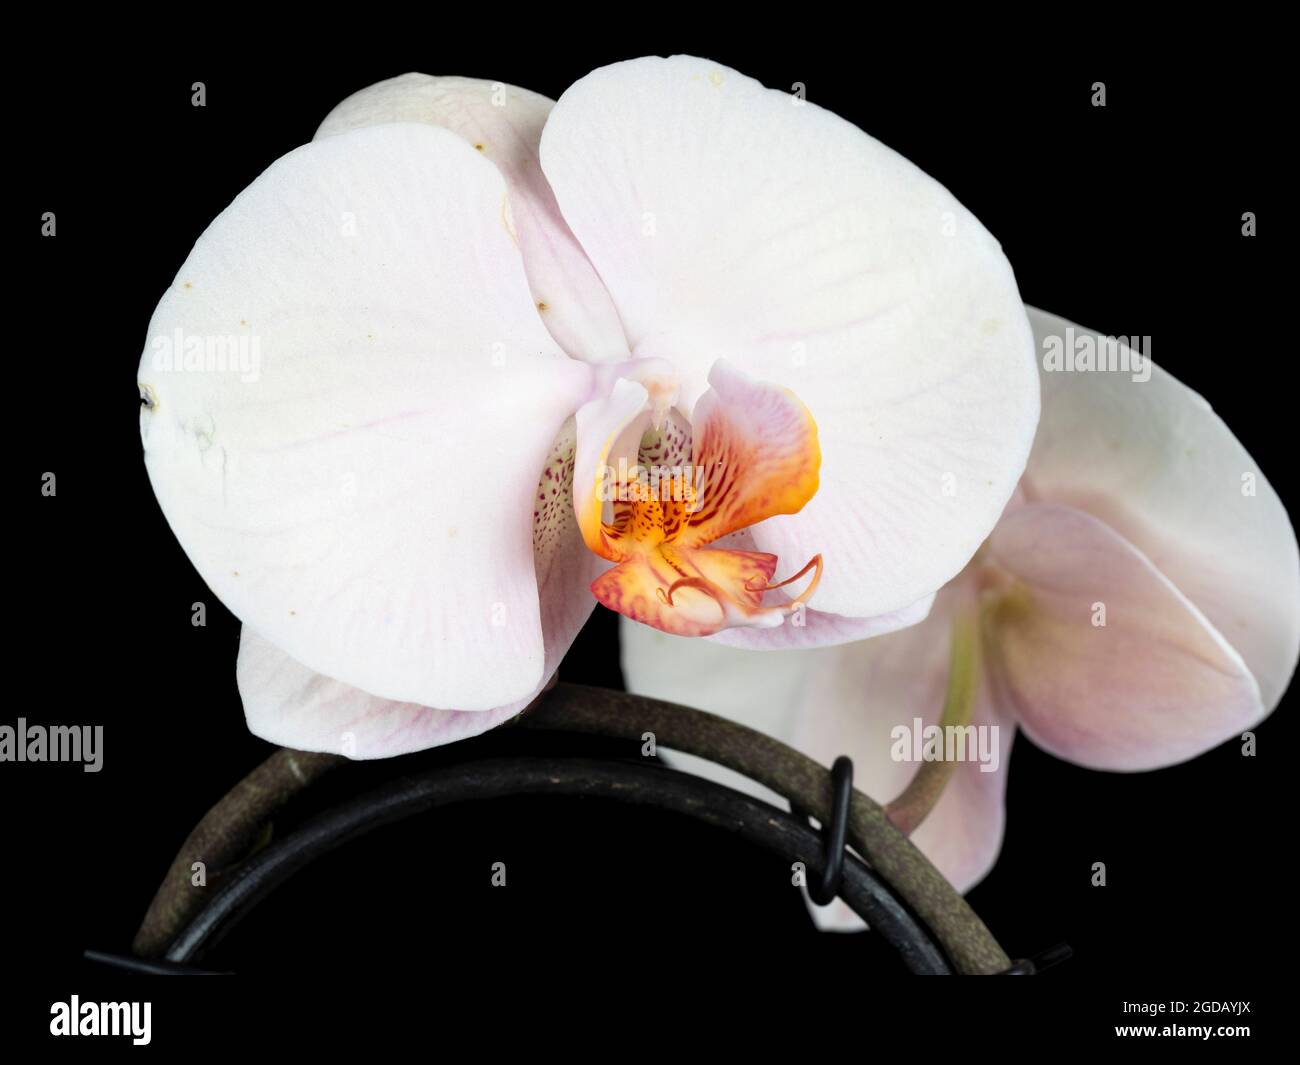 Large, pale flowers of the tender moth orchid, Phalaenopsis Venus 'Cascade' Stock Photo